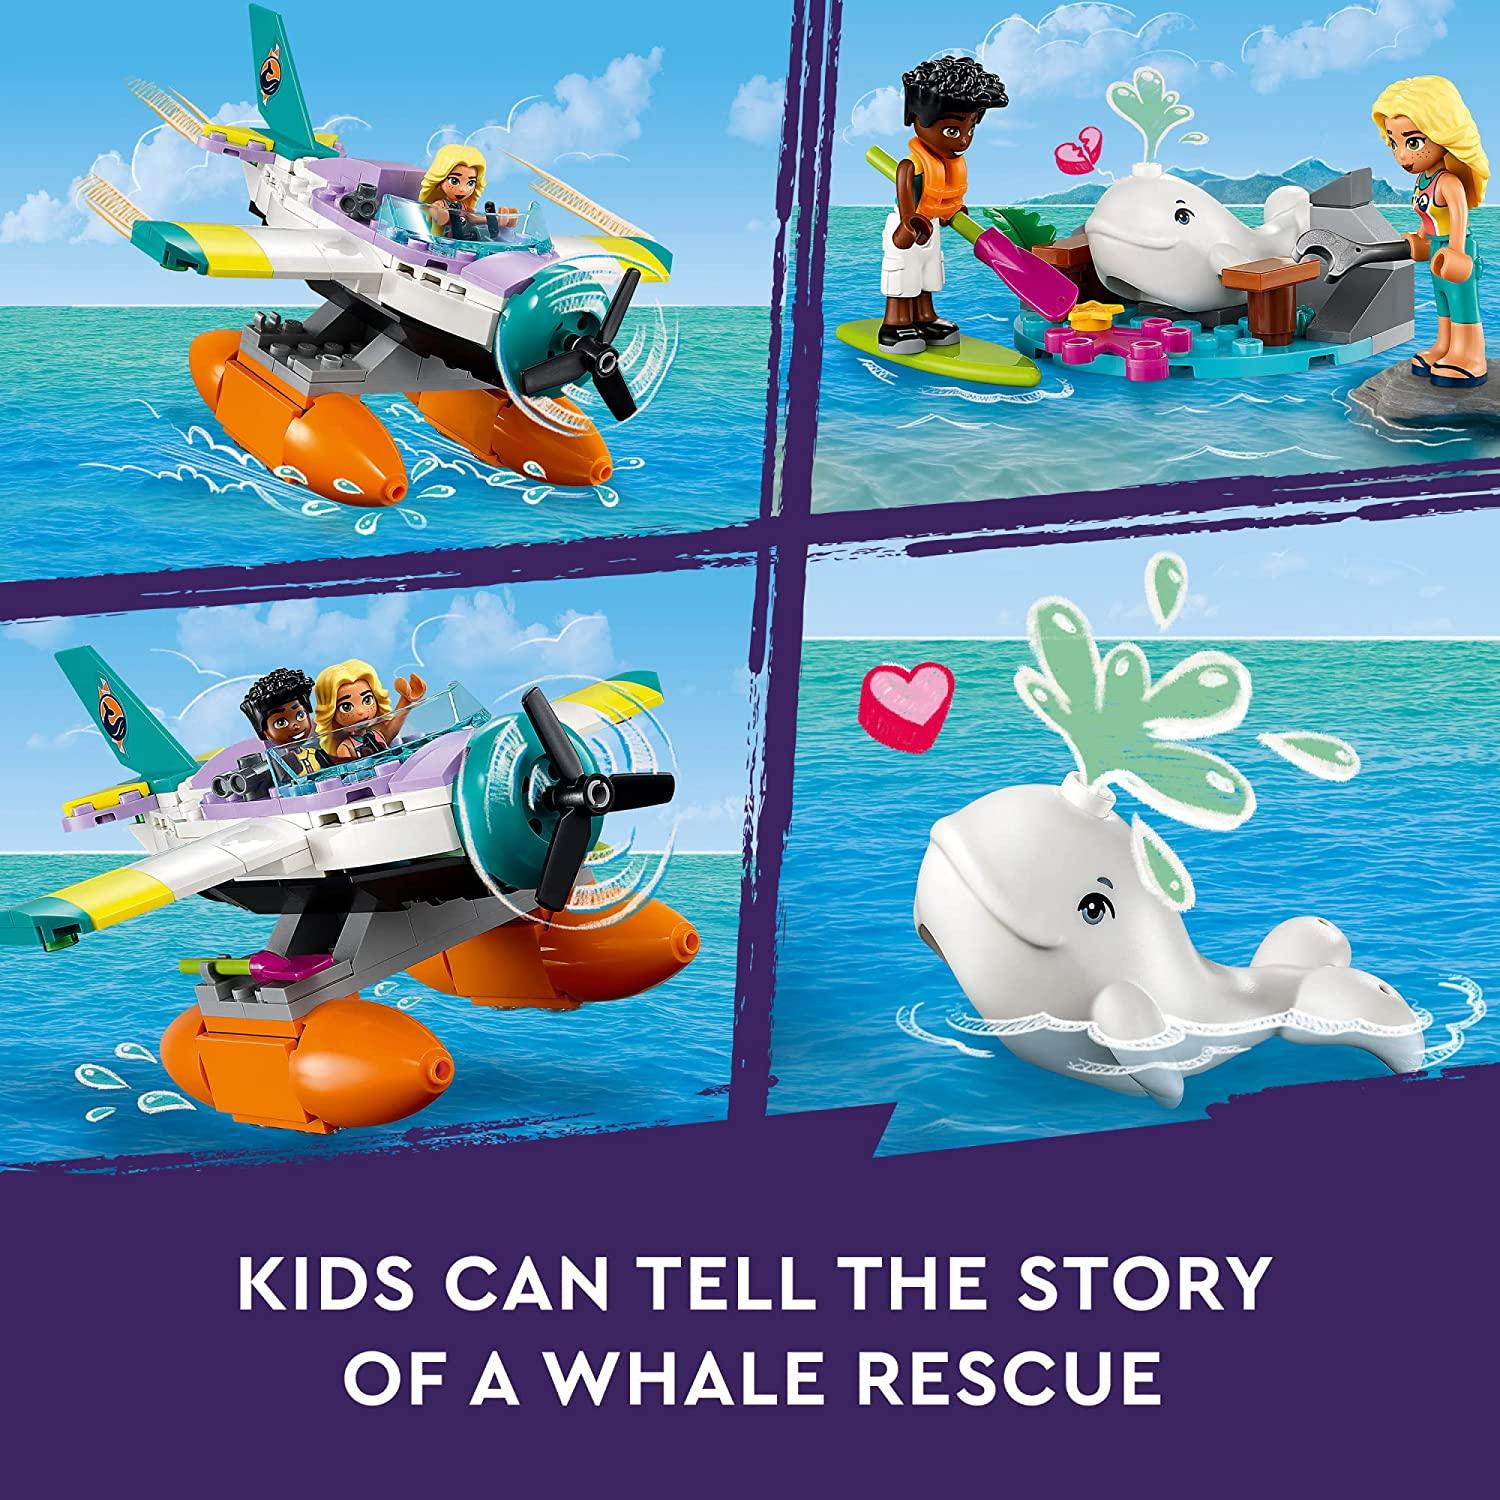 LEGO Friends Sea Rescue Plane 41752 Building Toy, Creative Fun for Girls and Boys Ages 6+ (203 Pieces) - BumbleToys - 5-7 Years, Boys, Friends, LEGO, OXE